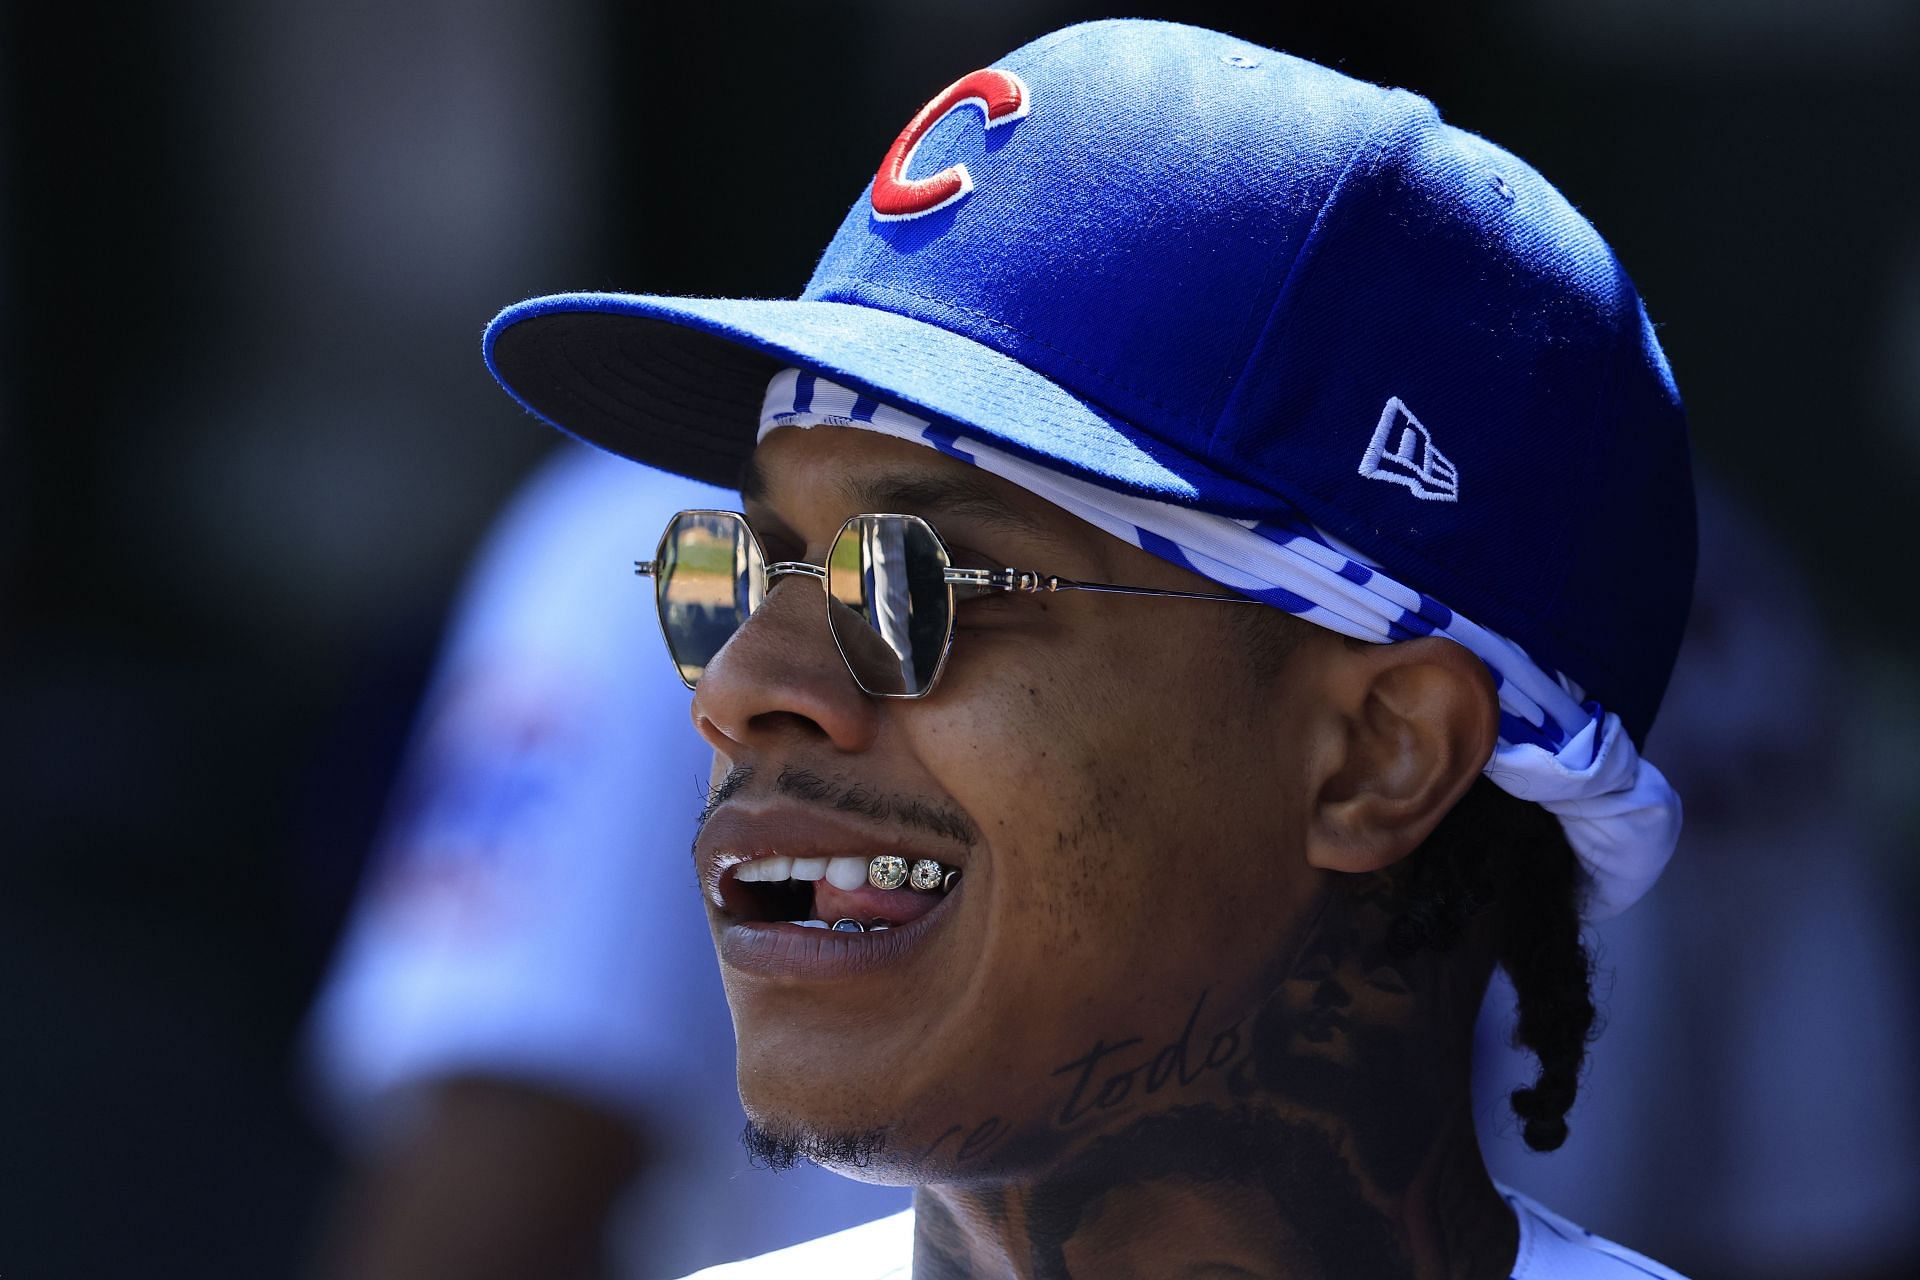 Marcus Stroman in the dugout before the start of the game against the Miami Marlins at Wrigley Field